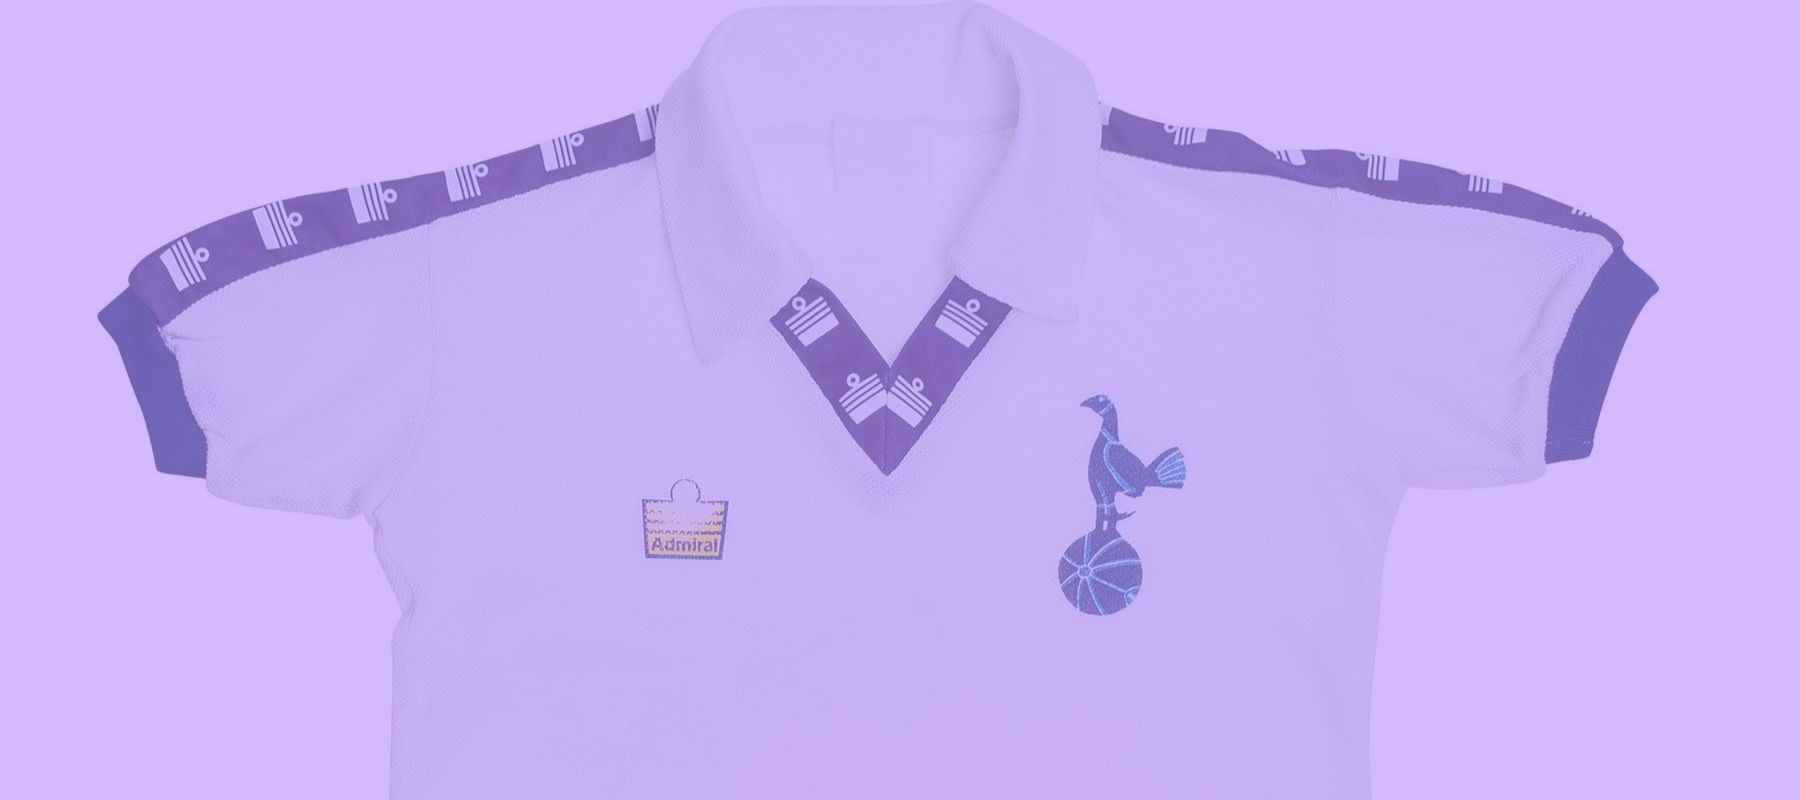 3 Admiral shirts inspired by Get Shirty